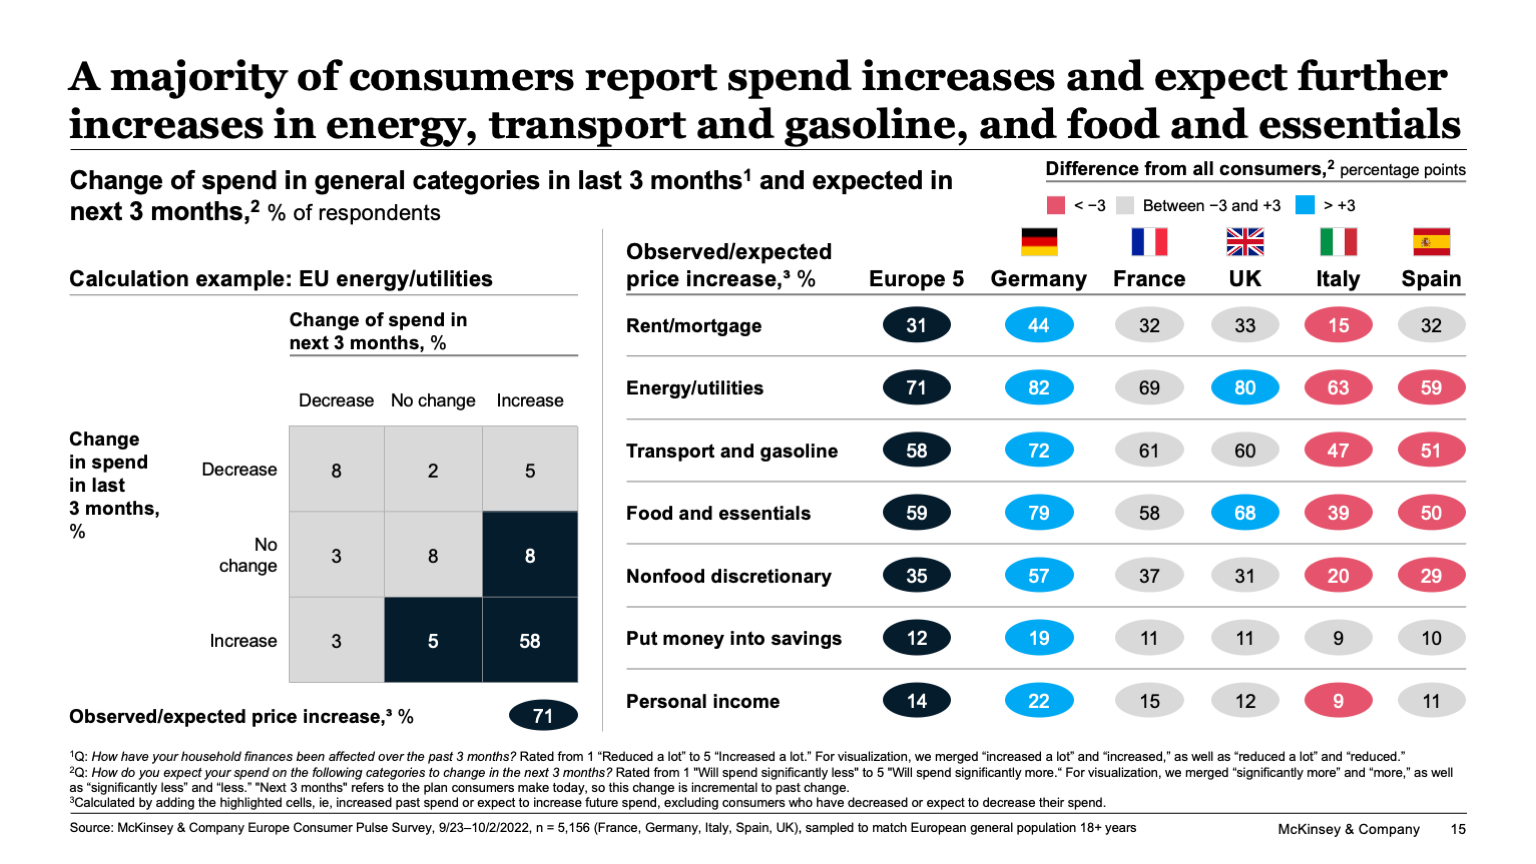 A majority of consumers report spend increases and expect further increases in energy, transport and gasoline, and food and essentials